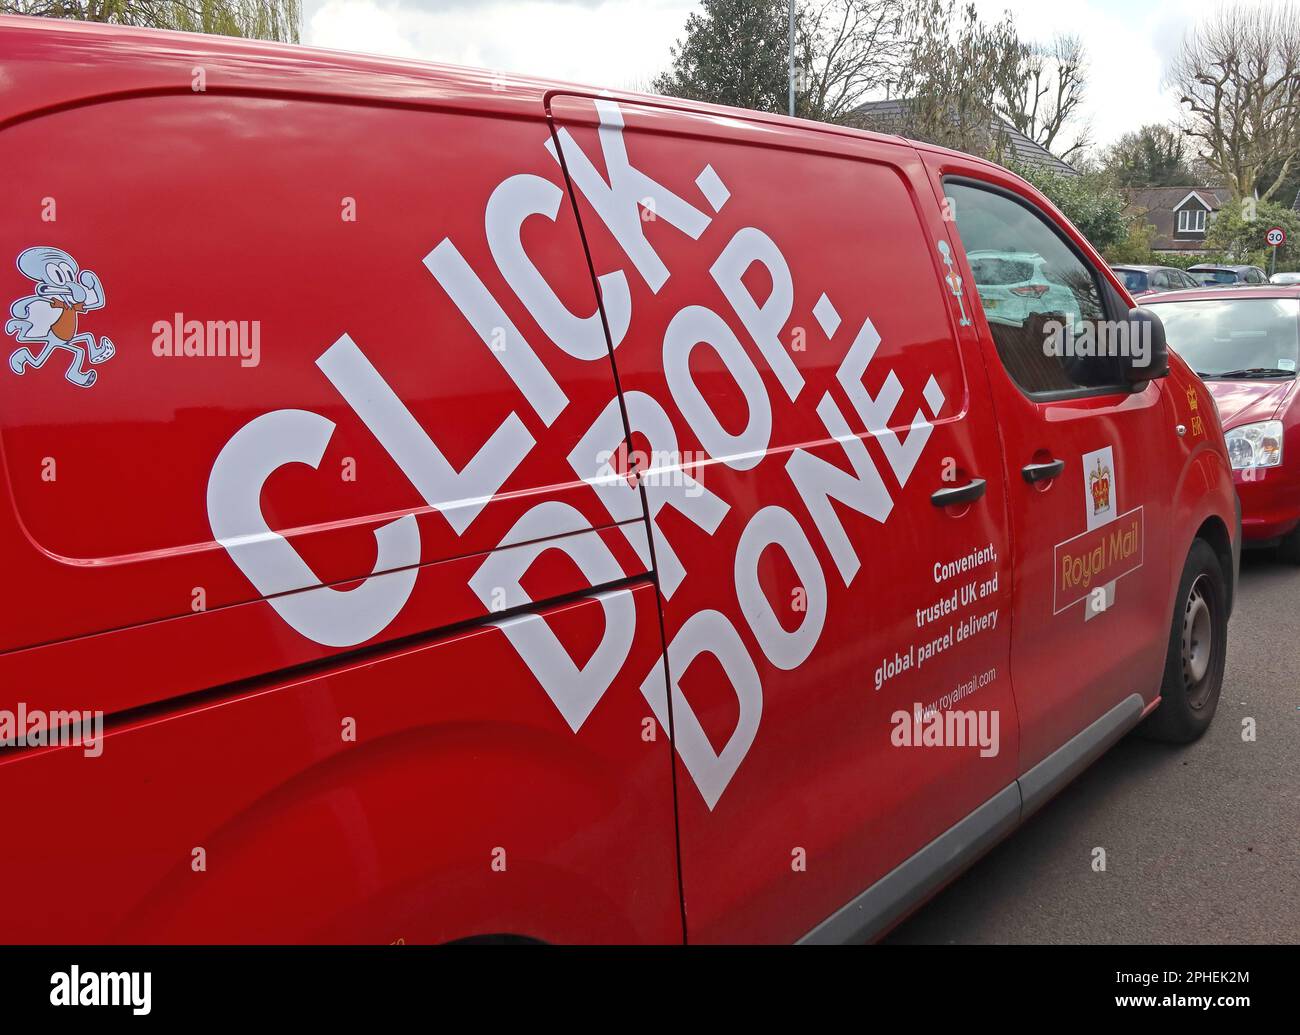 Royal Mail Van - advertising new emphasis on parcels, Click Drop Done parcel service Stock Photo